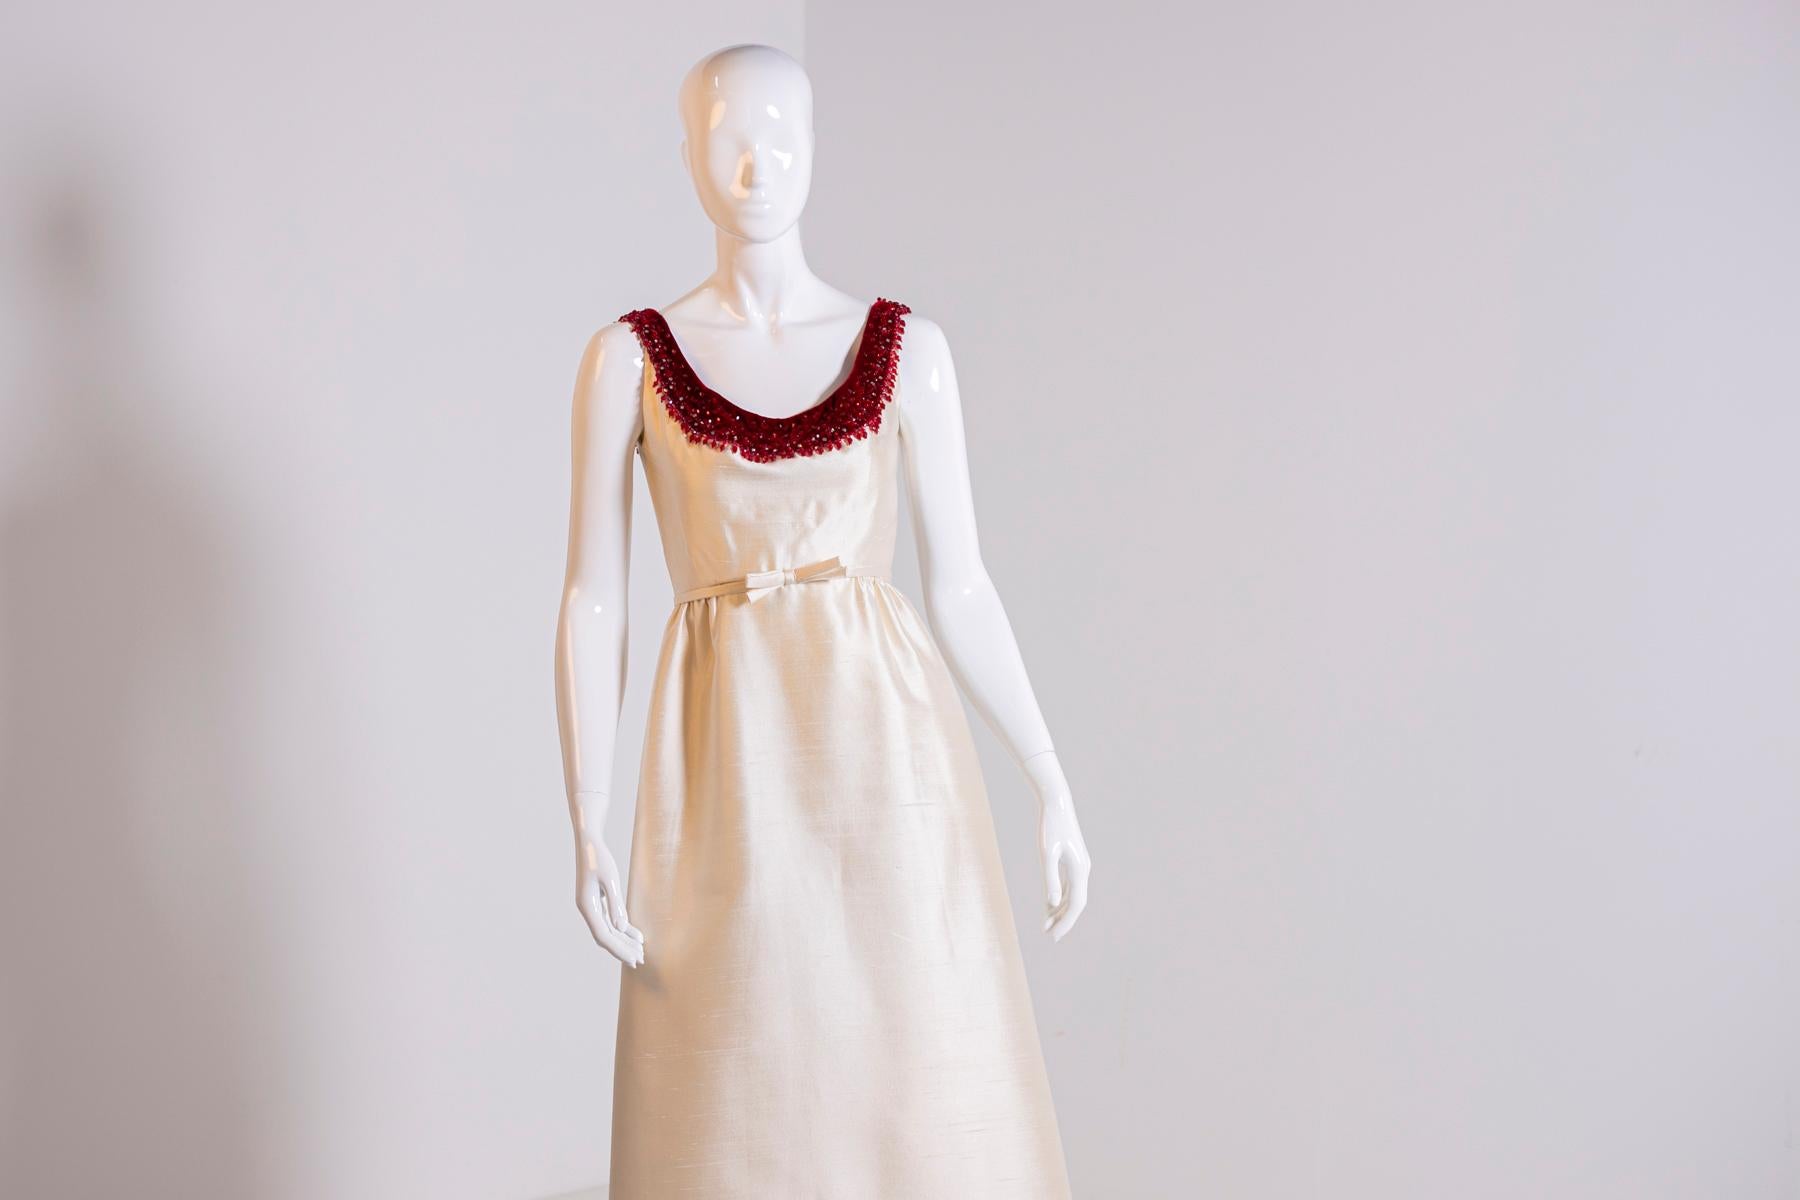 Refined and elegant evening dress or rather for American 50's Grand Gala. The dress is of the well-known American department store Carson Pirie Scotteco.
The dress with a strongly vintage 50's style is made of cotton satin fabric. In the decollete